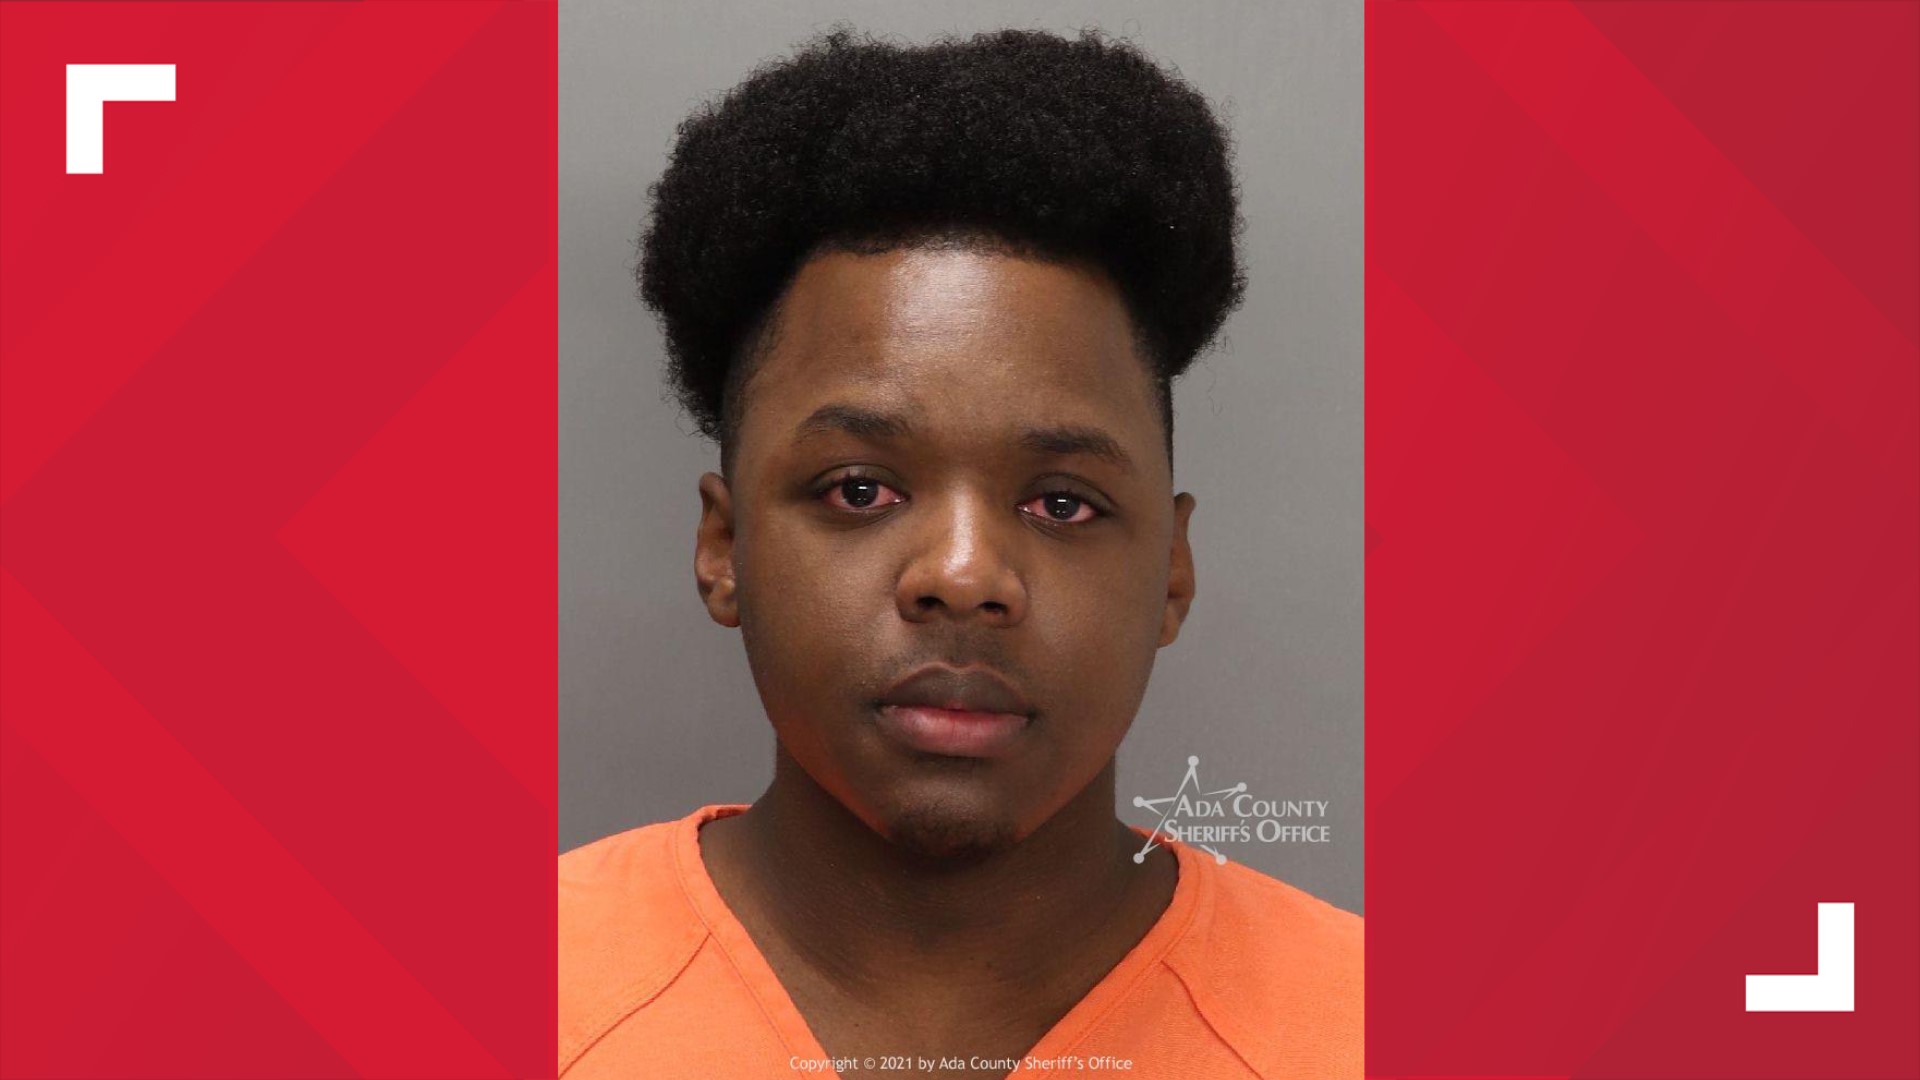 Timmothy Morgan has been found guilty of second-degree murder for killing 28-year-old Lamont "Bam" Rogers in September of 2021.